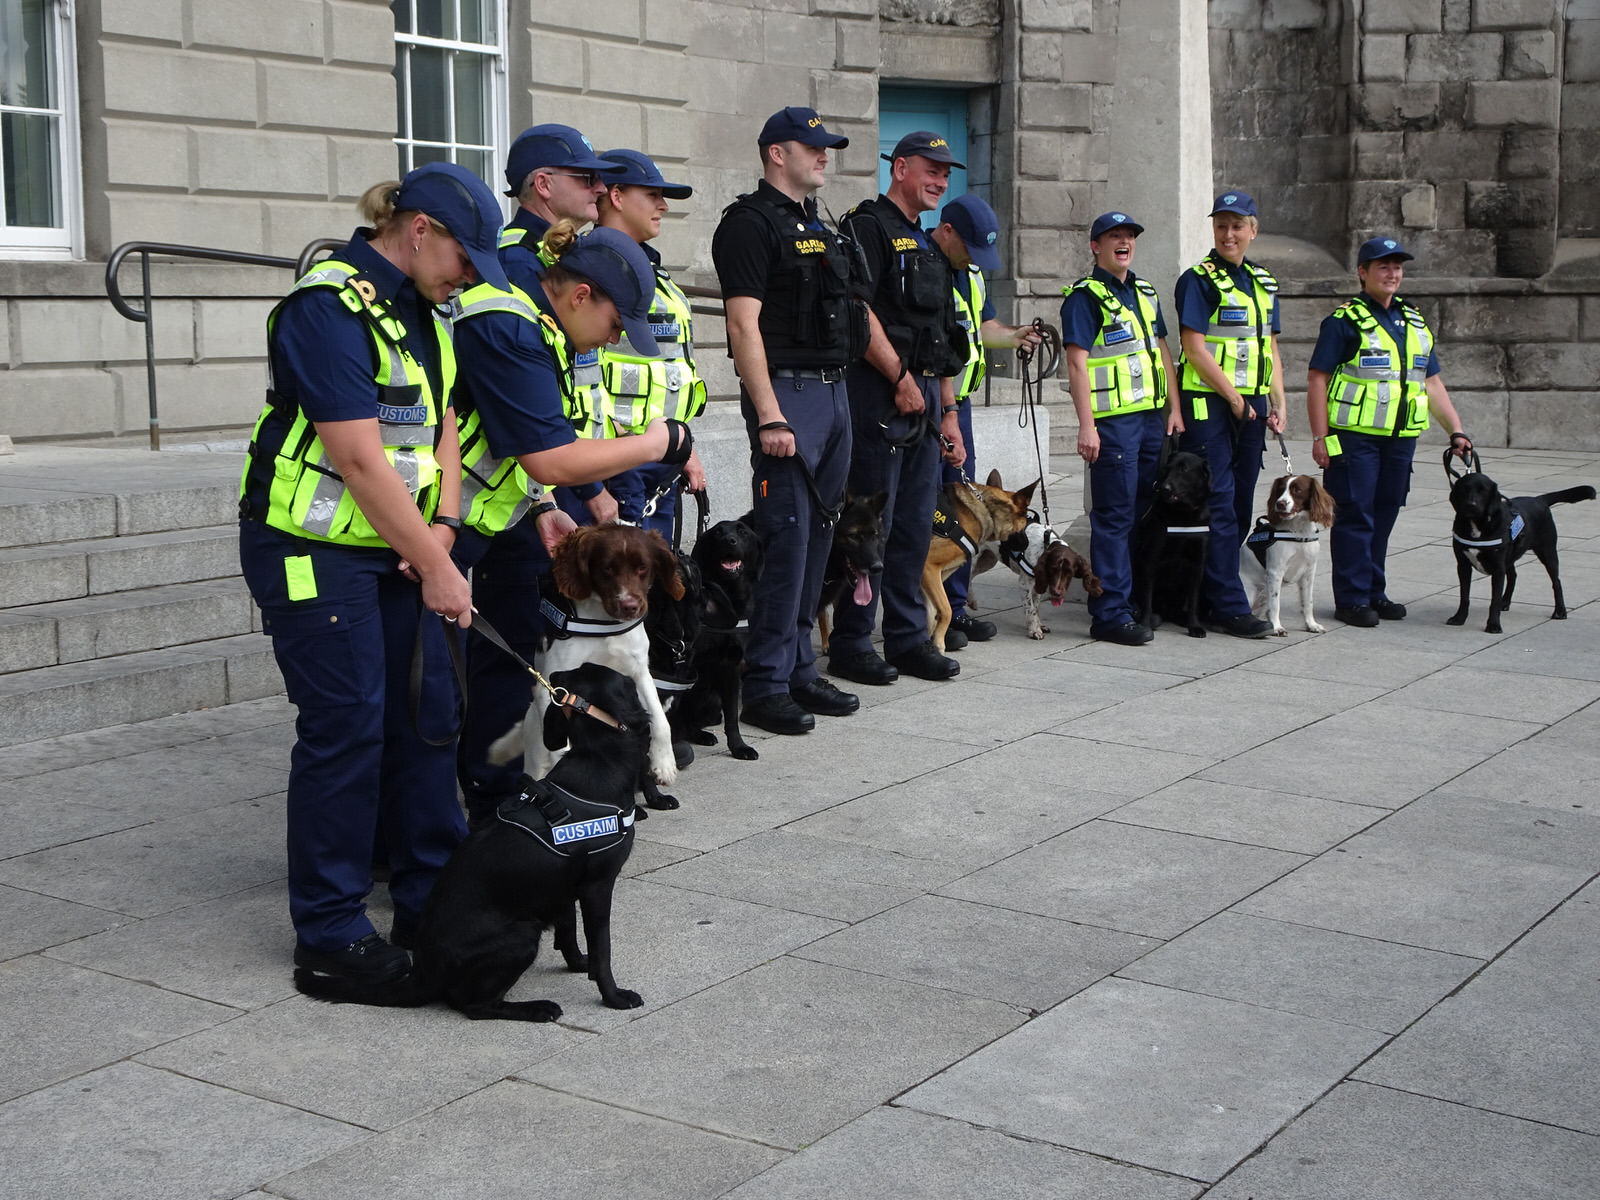 THE DOGS WHO WORK FOR THE IRISH CUSTOMS SERVICE [INVITED THE PRESS TO A PHOTO-SHOOT]
 005